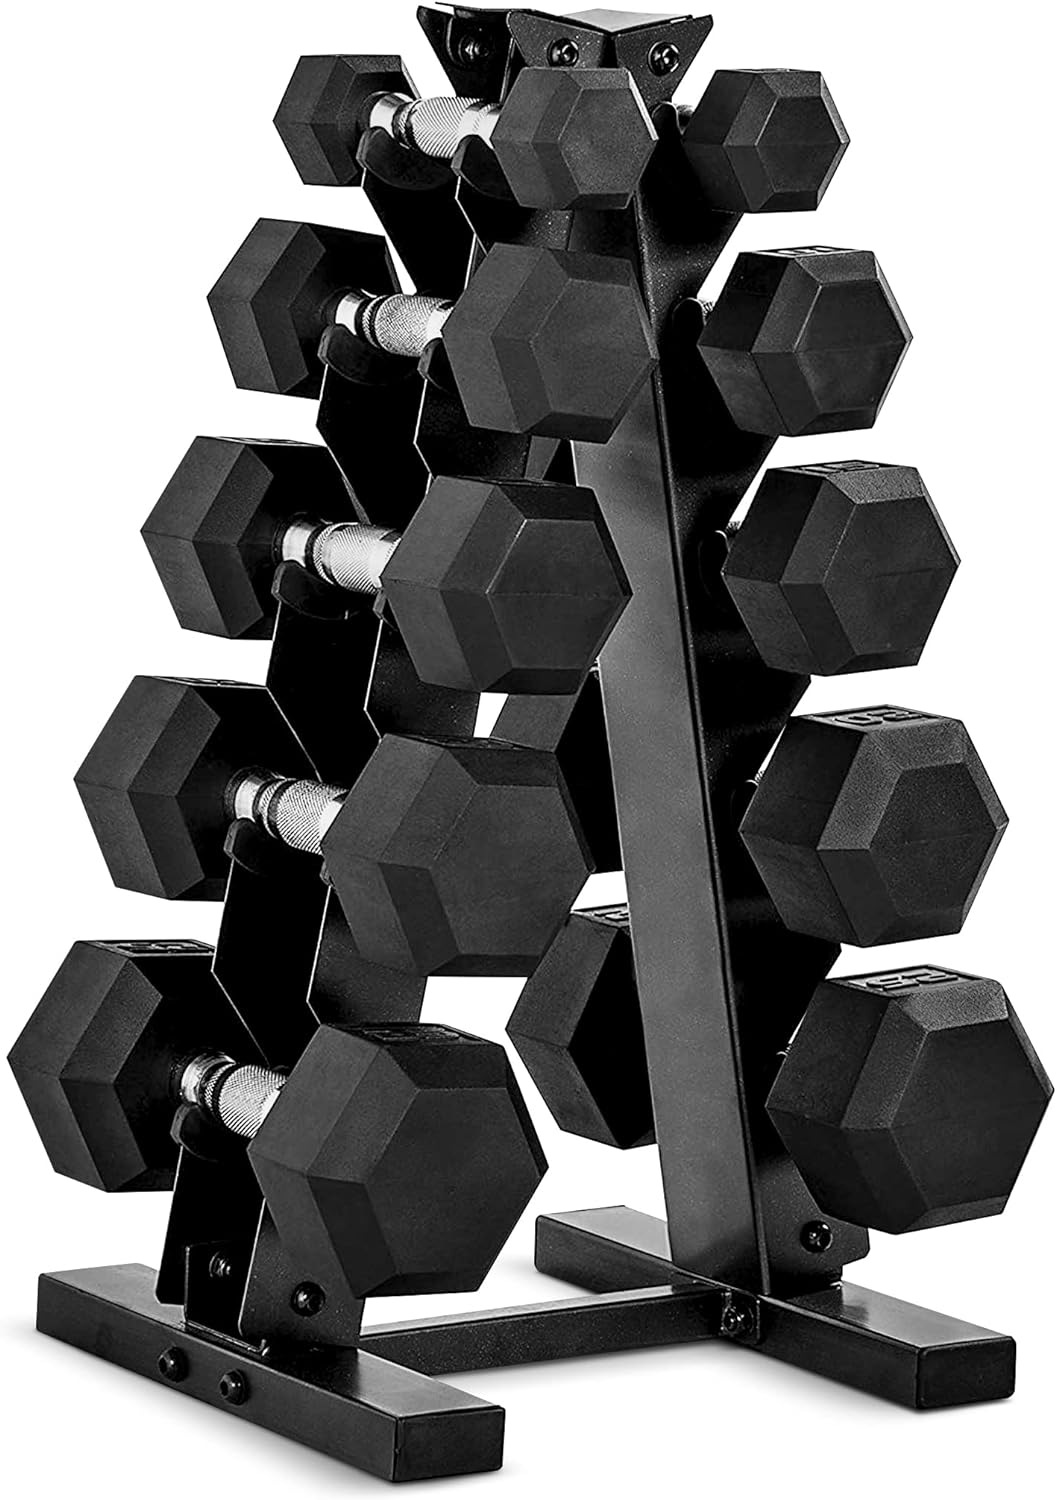 150 LB Dumbbell Set with Rack